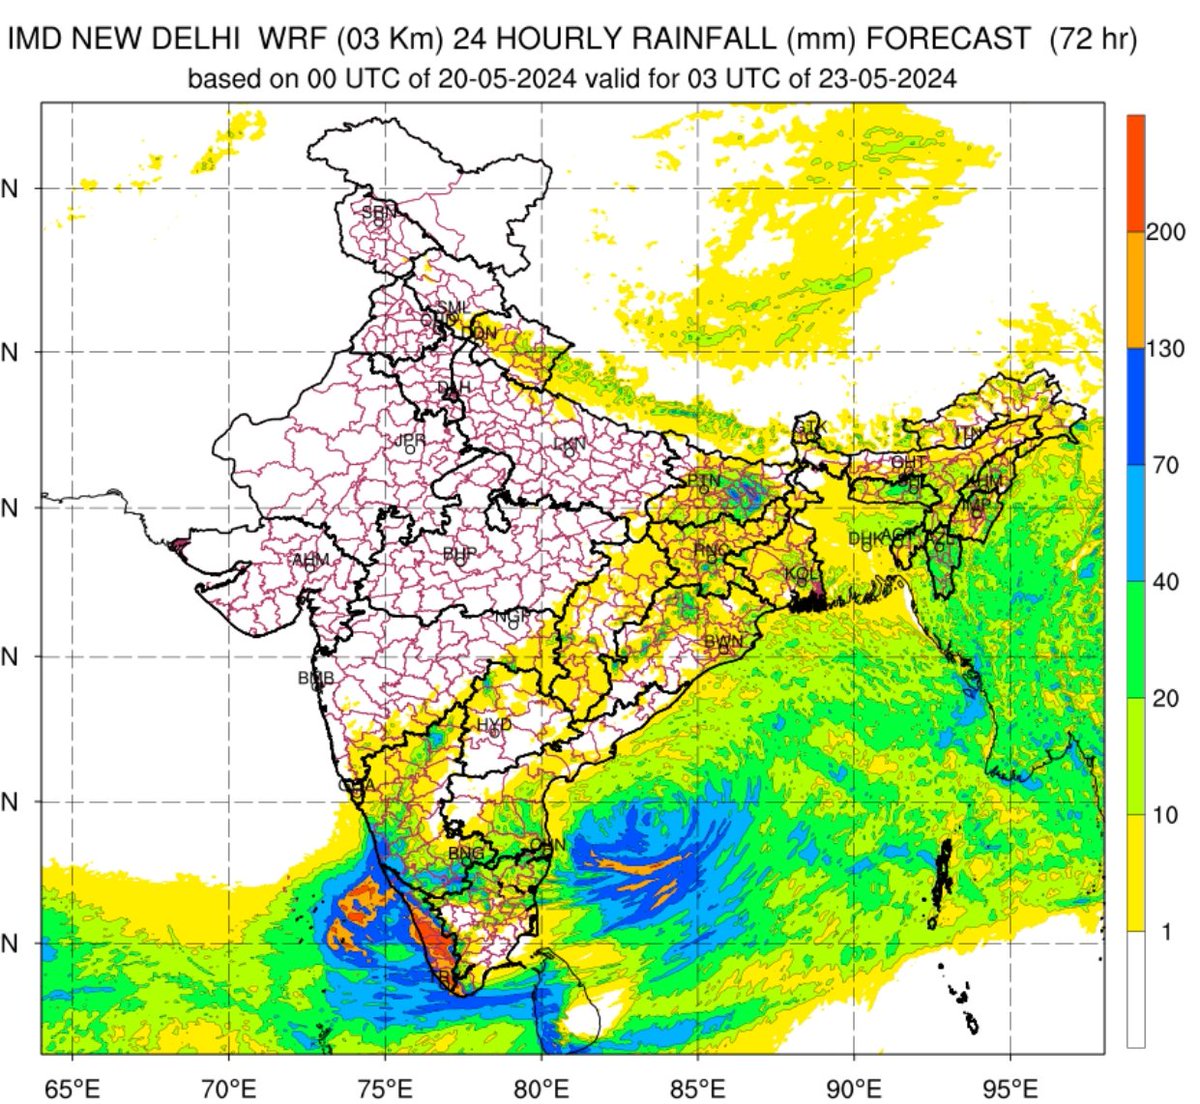 As predicted, areas in #Kerala have already seen around 200mm+ rainfall accumulation over last 2 days! ⚠️Much more to come next 48-72hrs as the shear zone looks likely to spin a mesoscale #vortex that can dump massive amounts 🌧️🌧️ ⚠️Need to stay alert as IMD's high res models